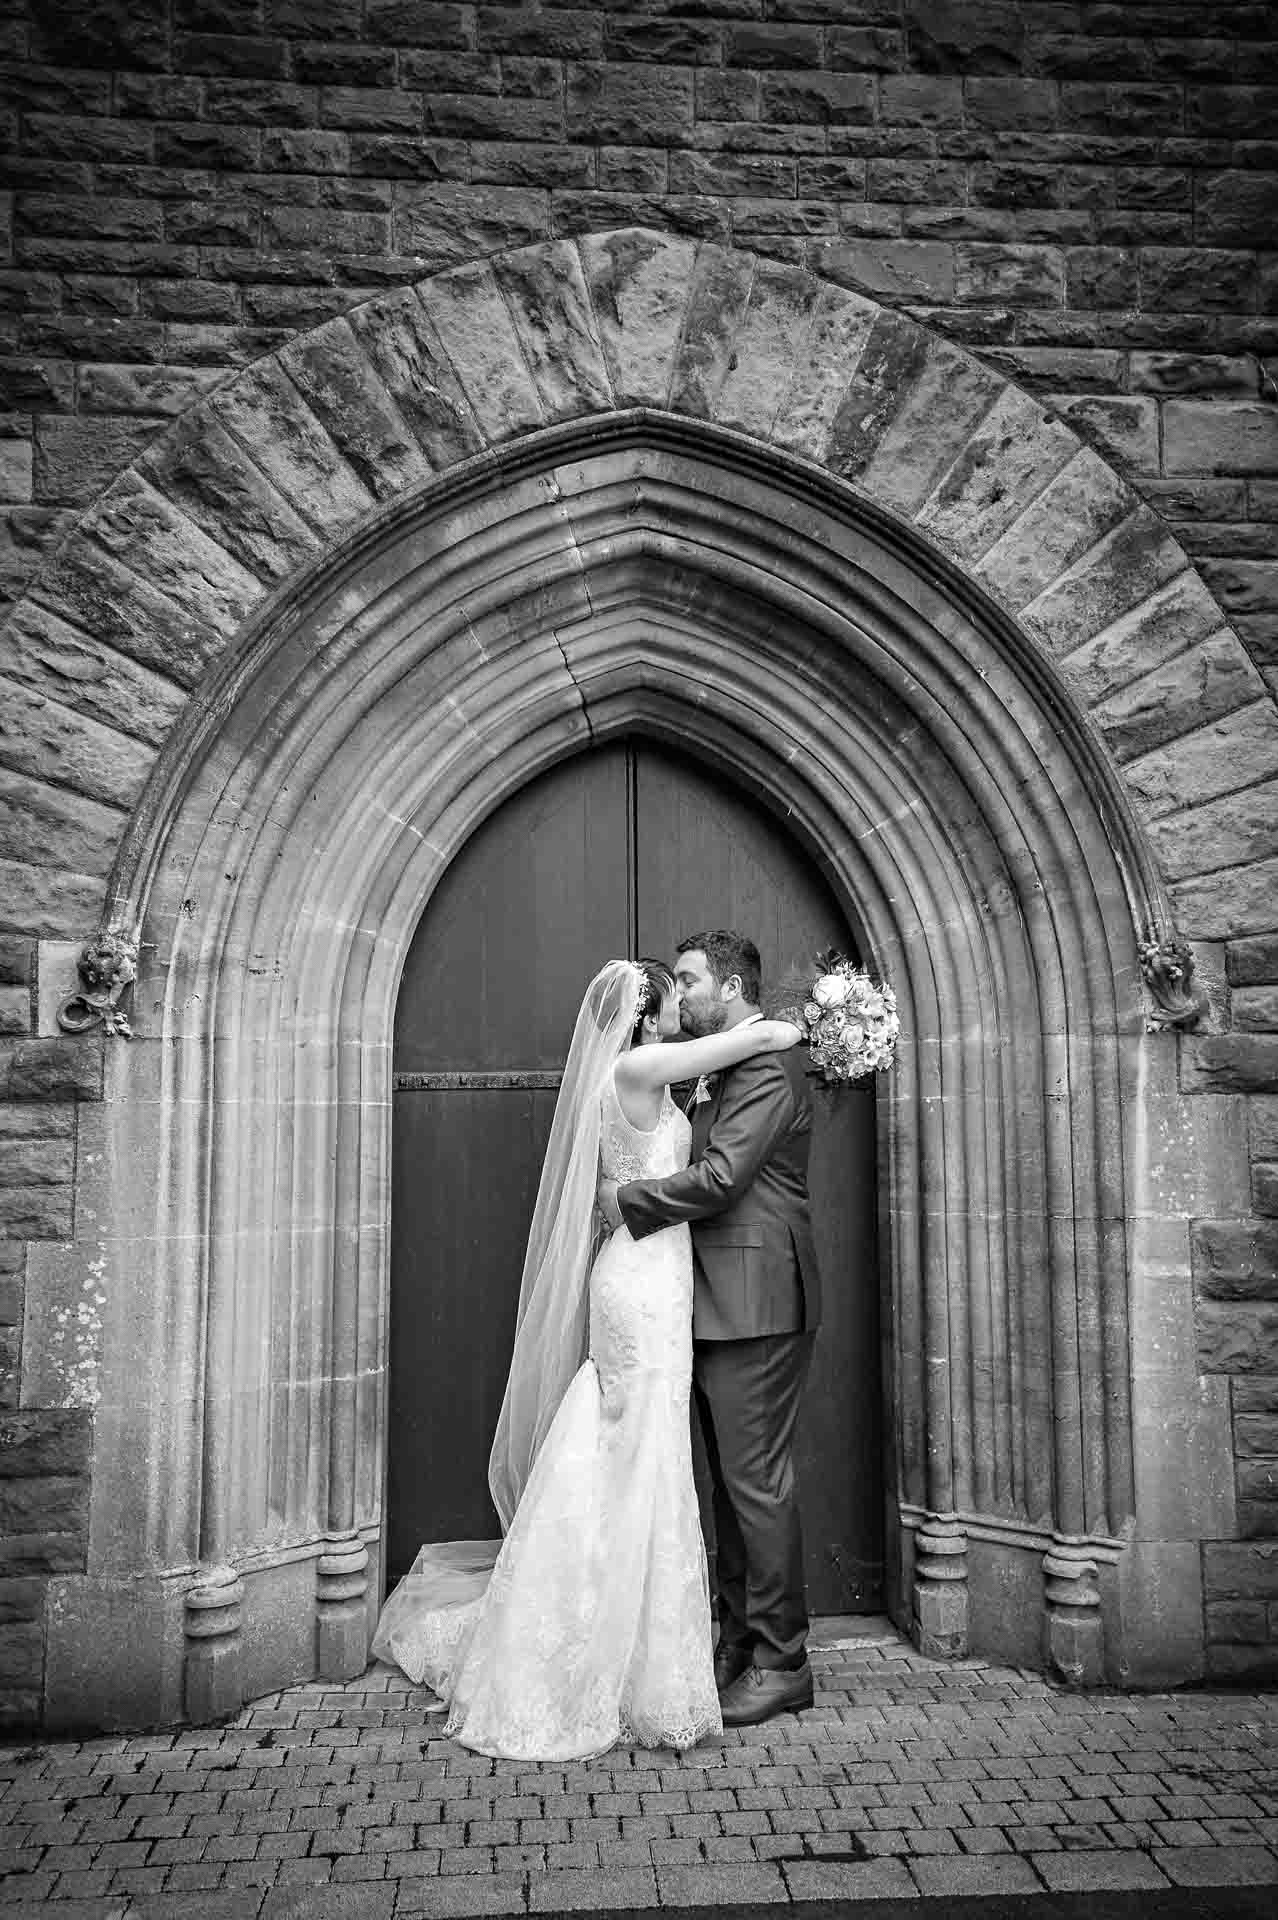 Couple kissing outside Gothic church door in South Wales